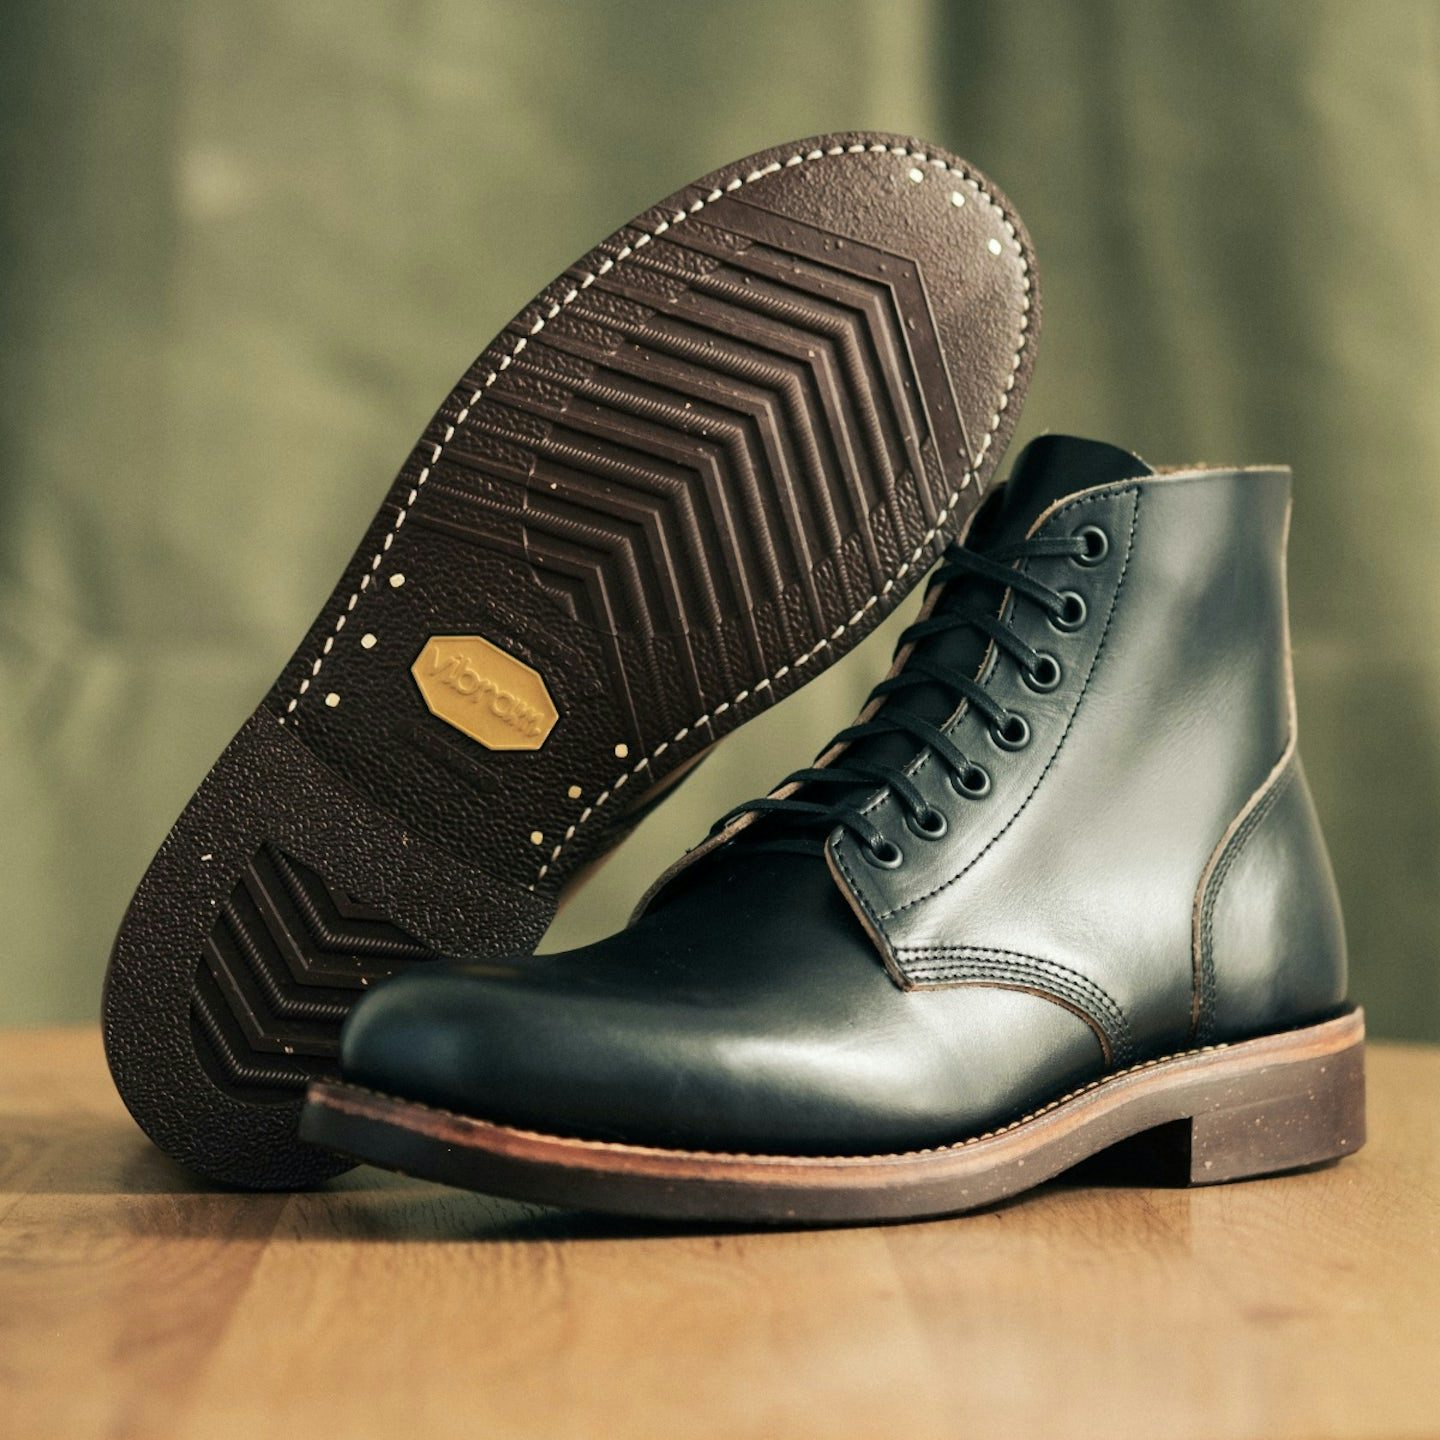 The All-New Field Boot - Hand-Lasted & Hand-Finished